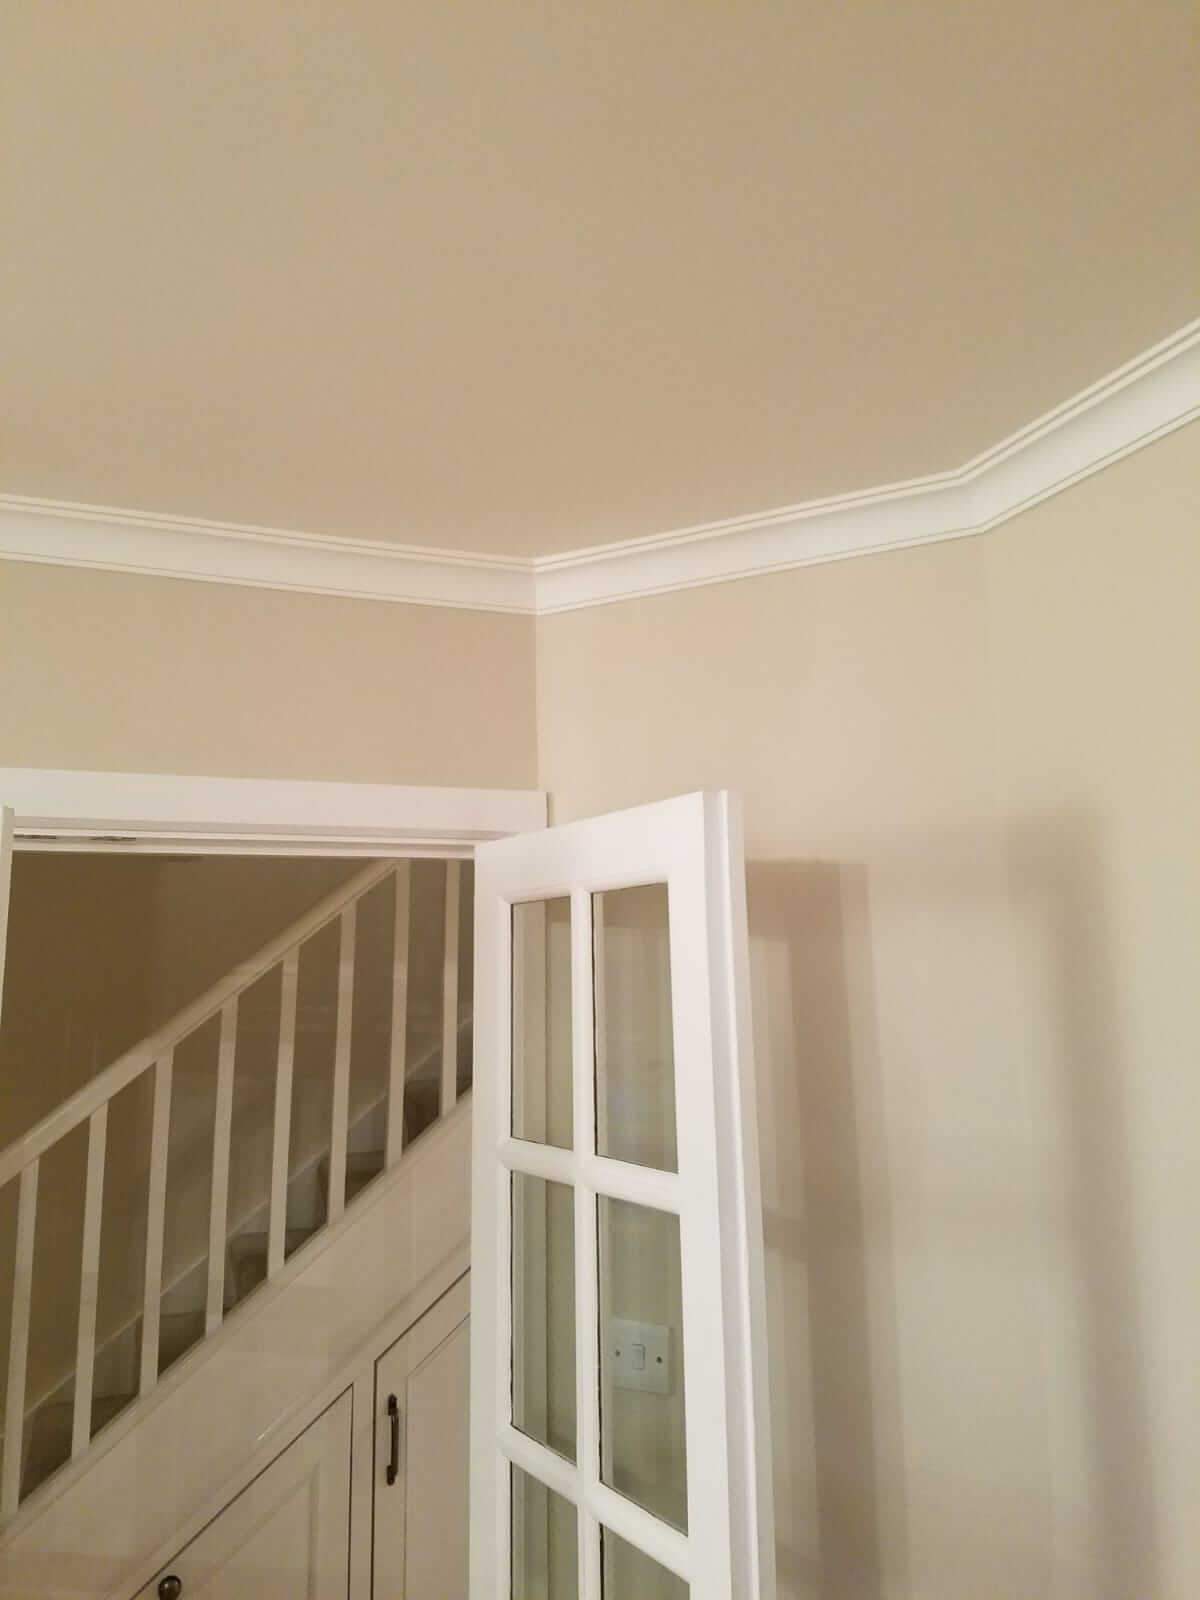 C3016 - Classic Coving installed above a door